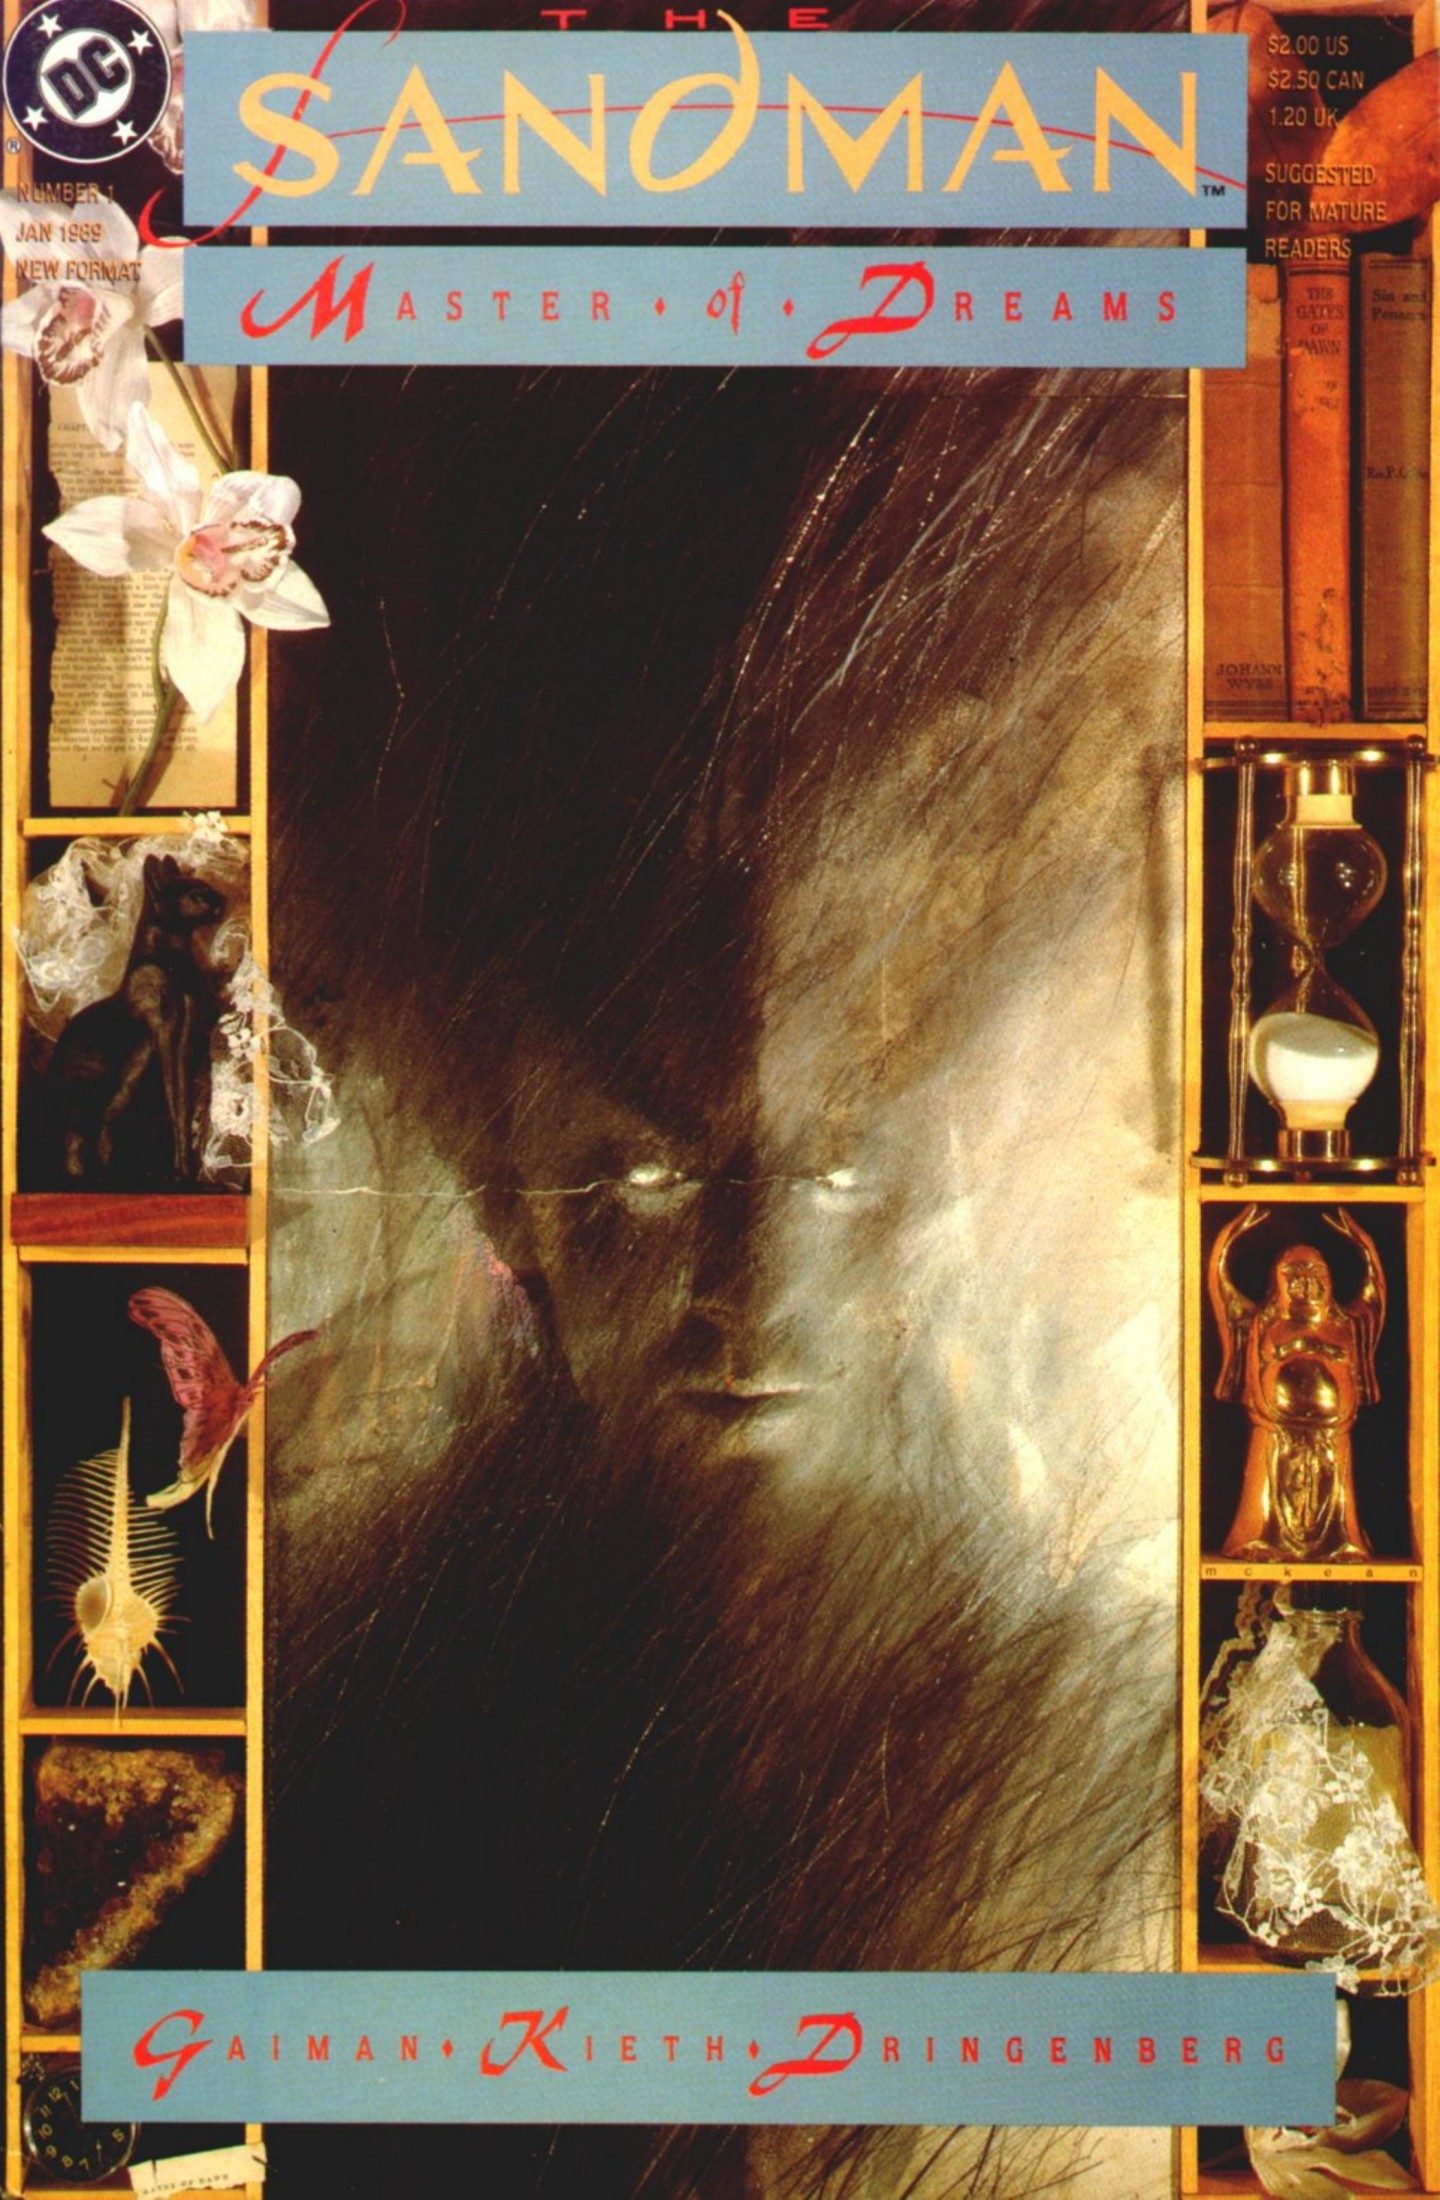 The Sandman #01 Preludes and Nocturnes